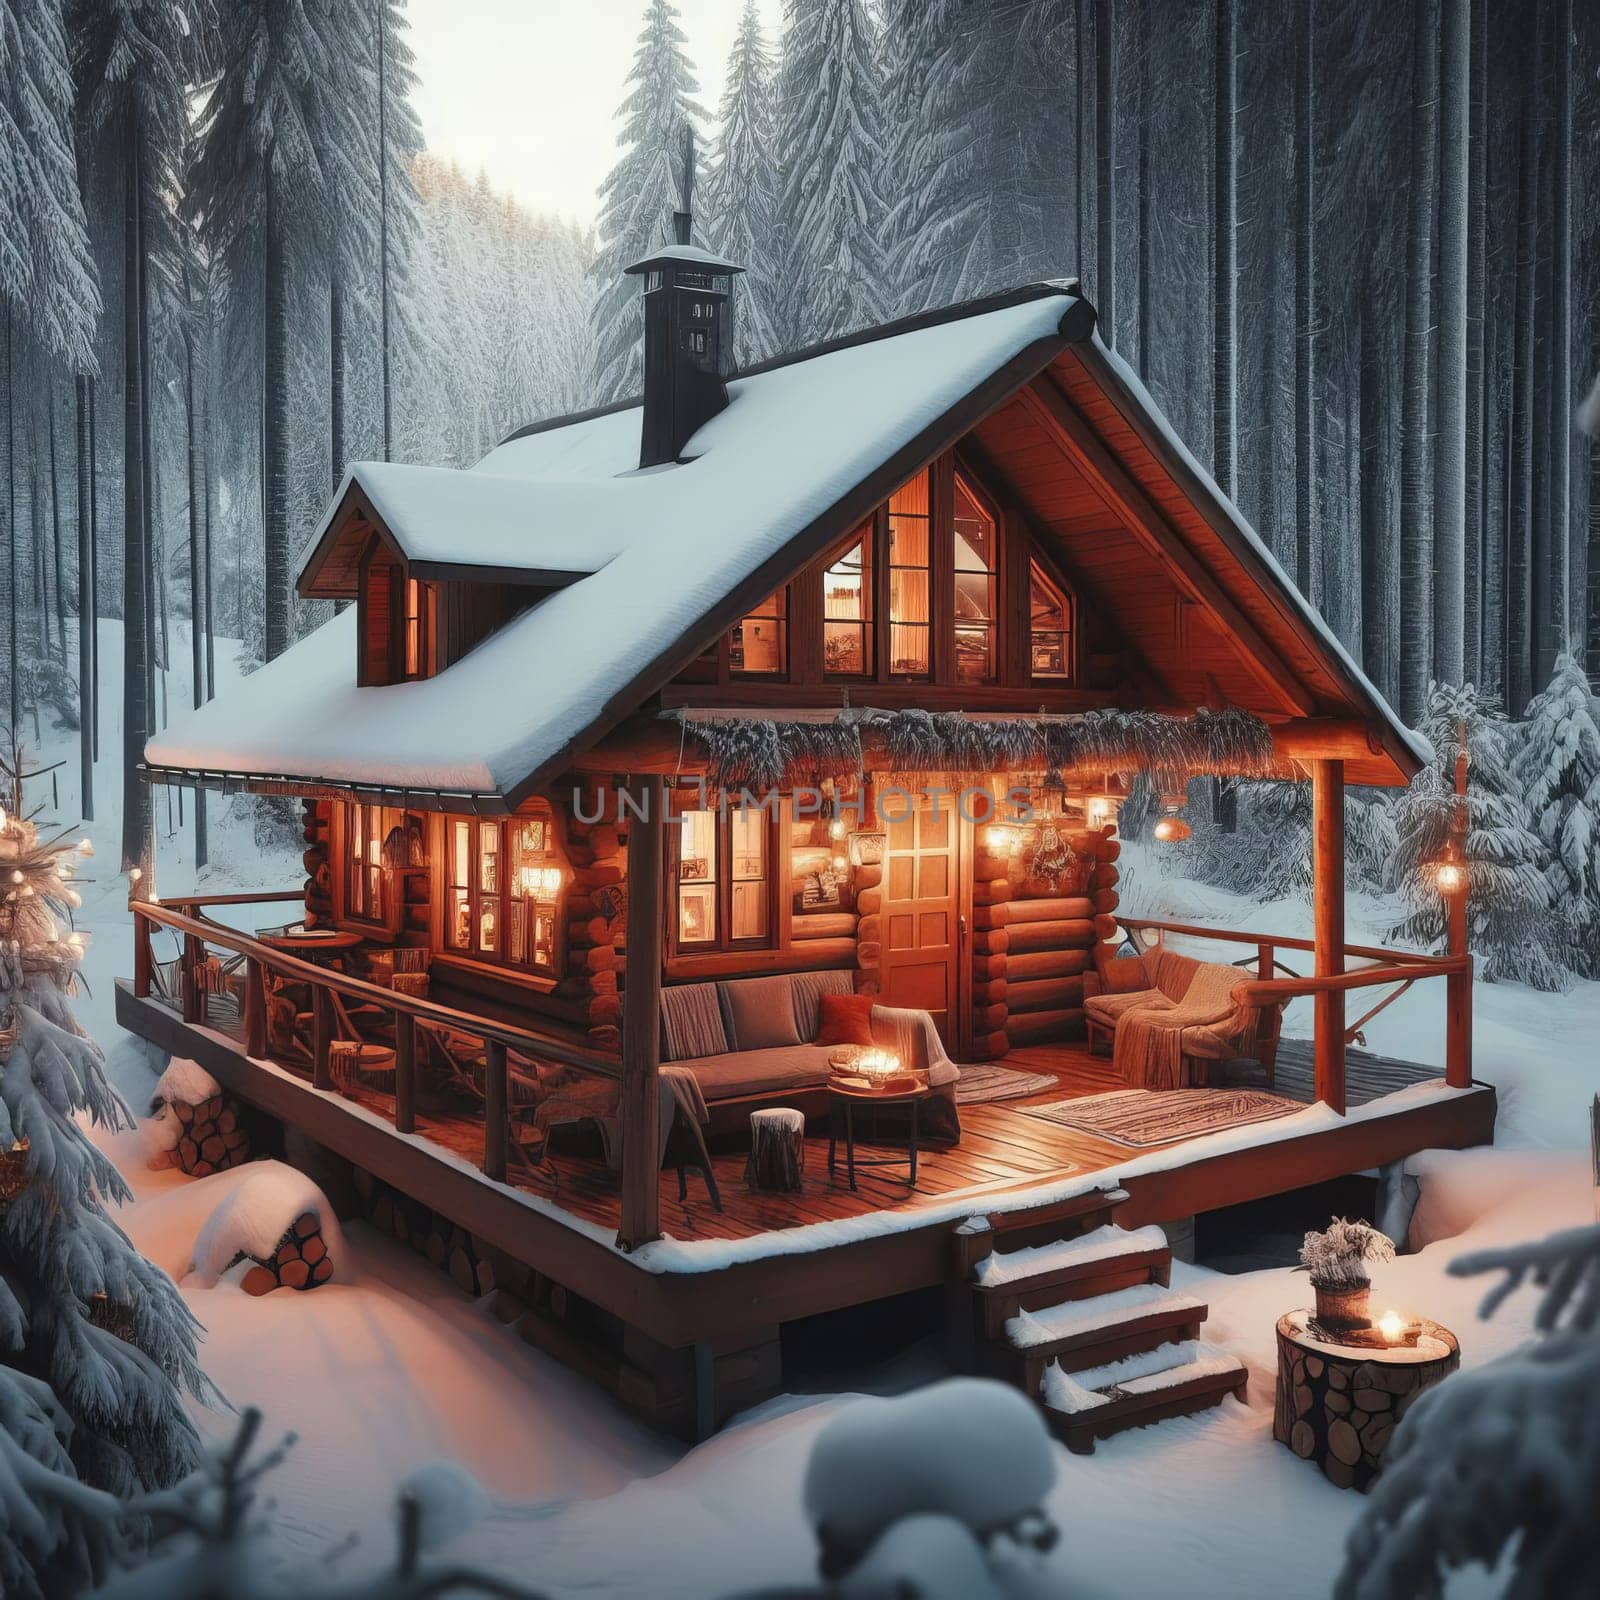 A cozy log cabin in the frozen woods with snow on the roof and warm glow from the windows